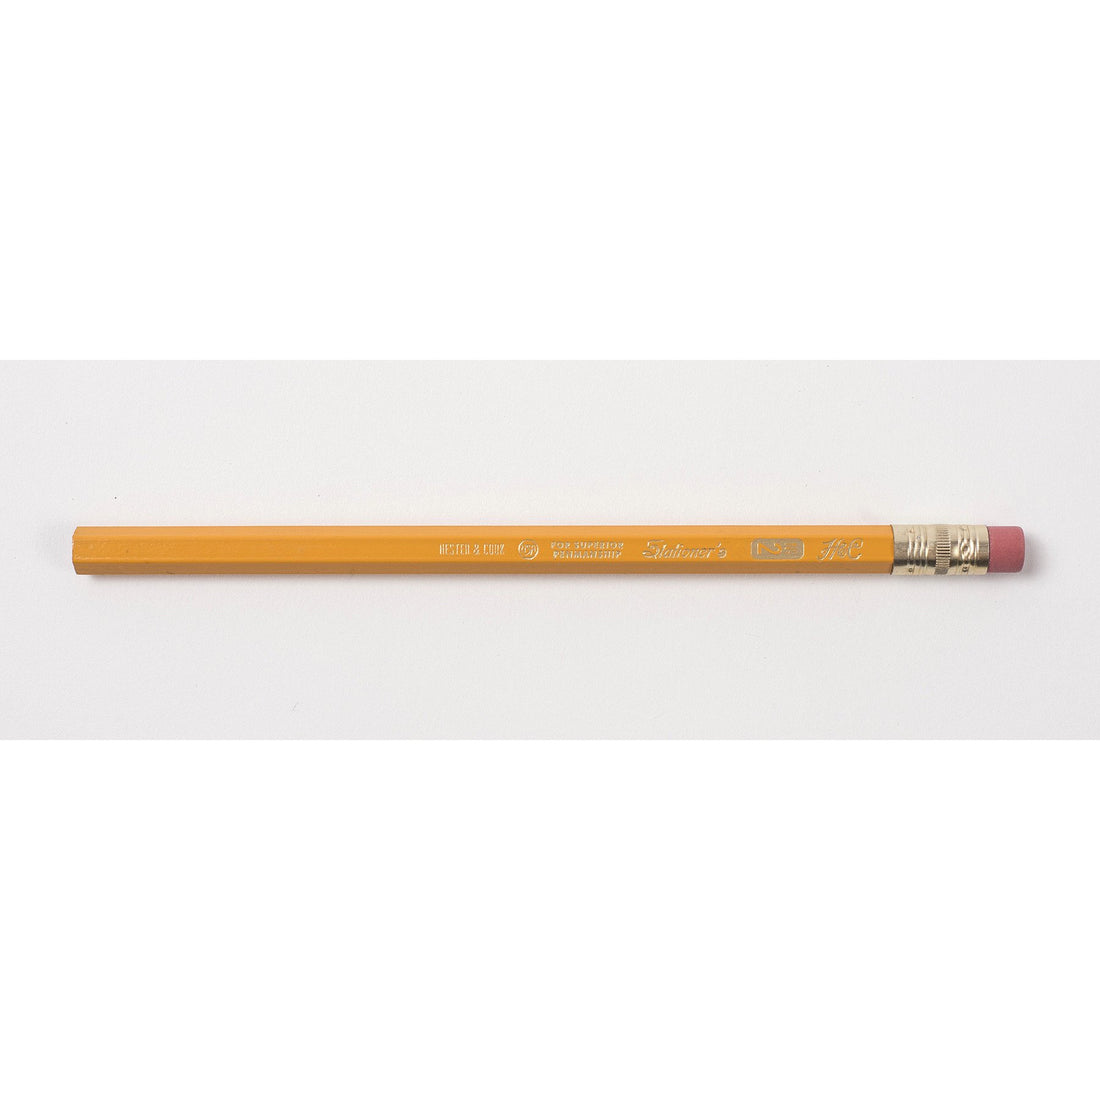 A Jumbo Hex Pencil, a writing instrument by Hester &amp; Cook, on a white background.